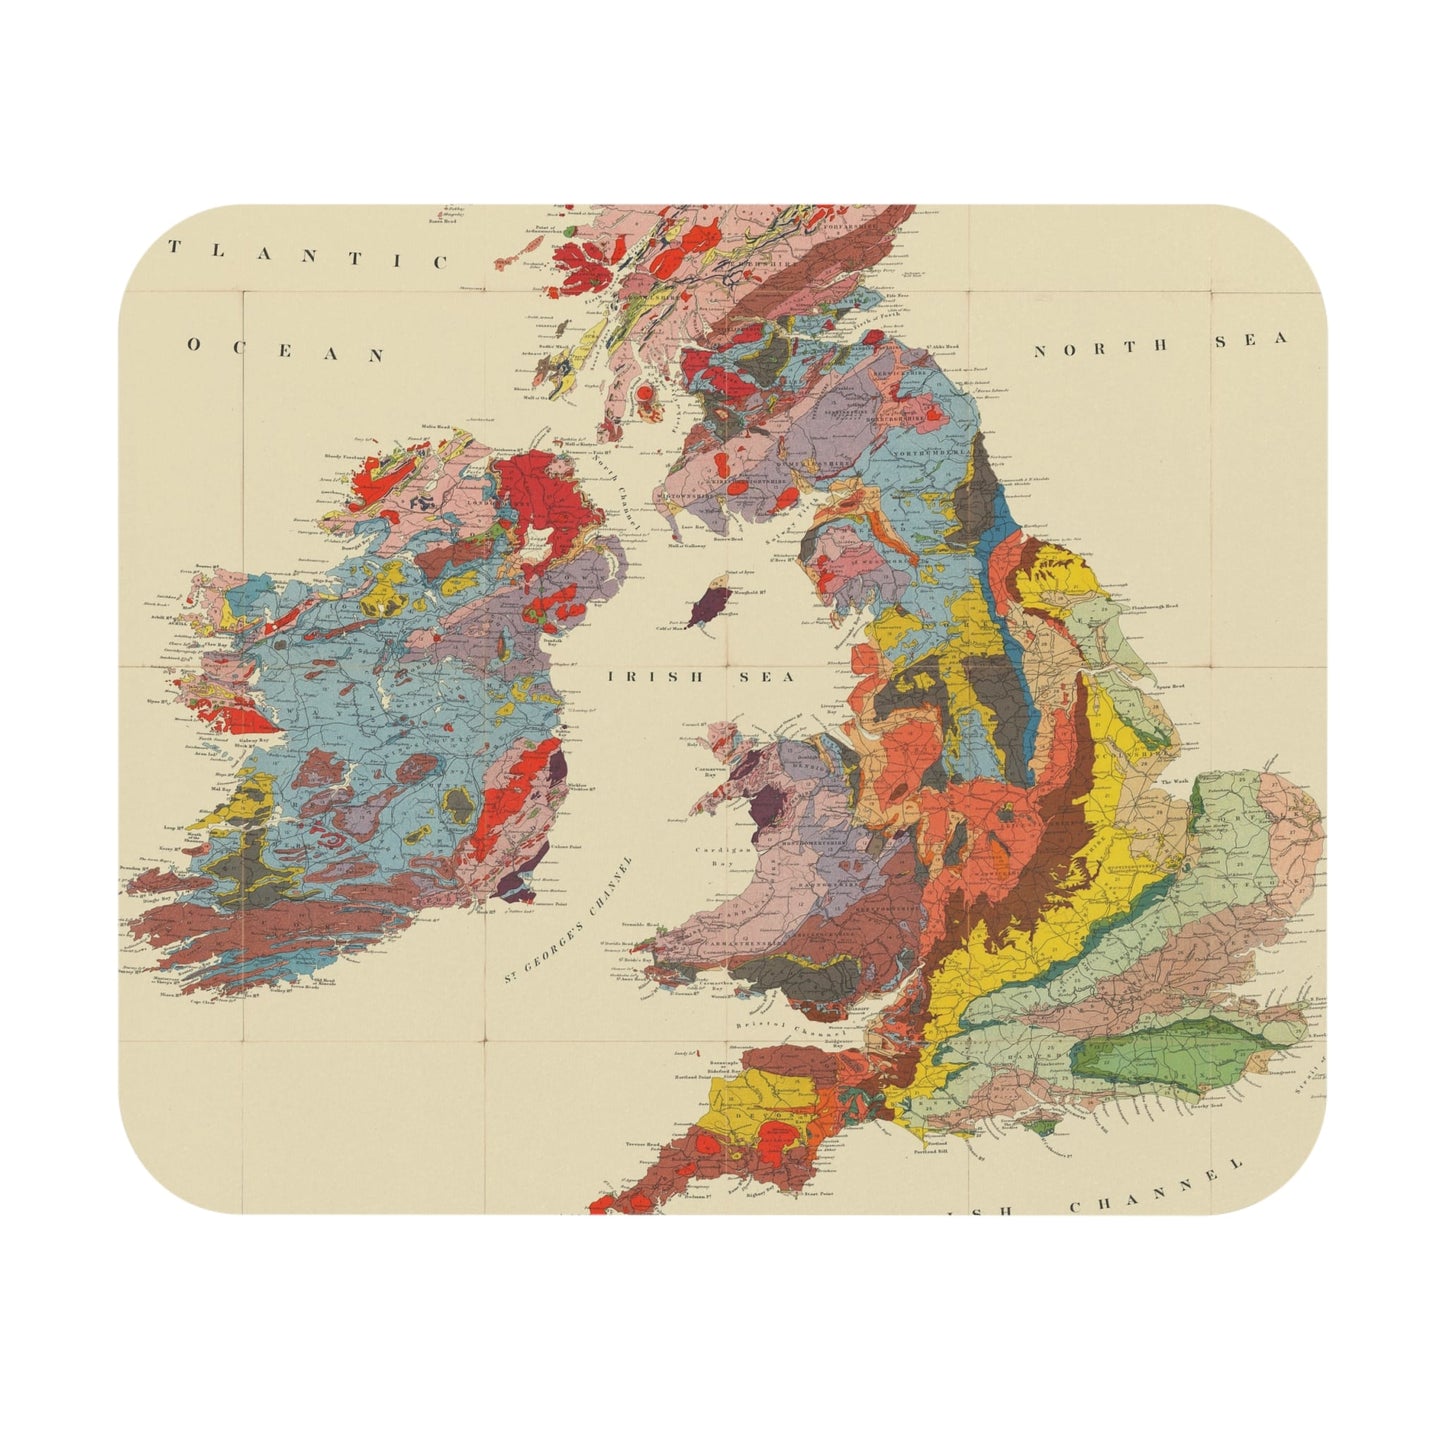 Vintage United Kingdom Map Mouse Pad with colorful maps art, desk and office decor featuring UK map designs.